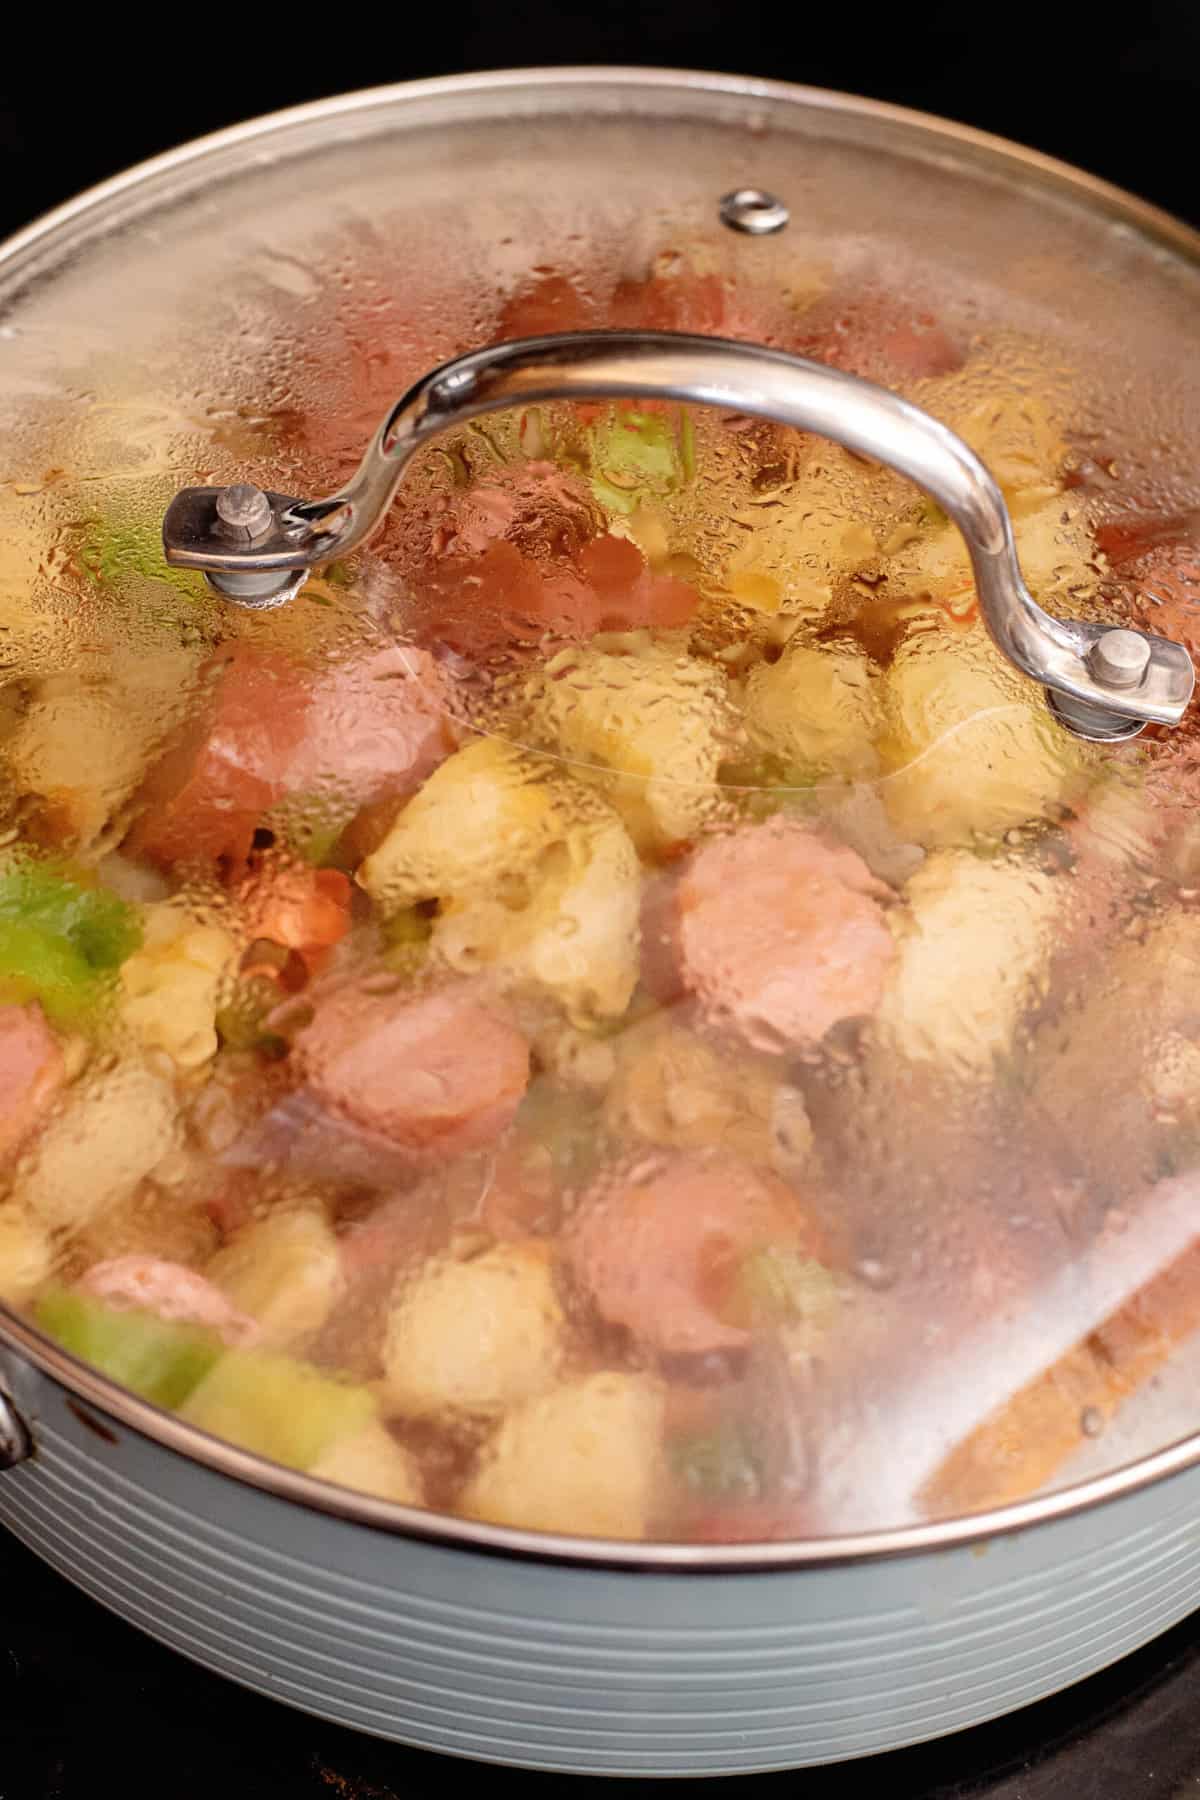 Add lid to let potatoes steam.